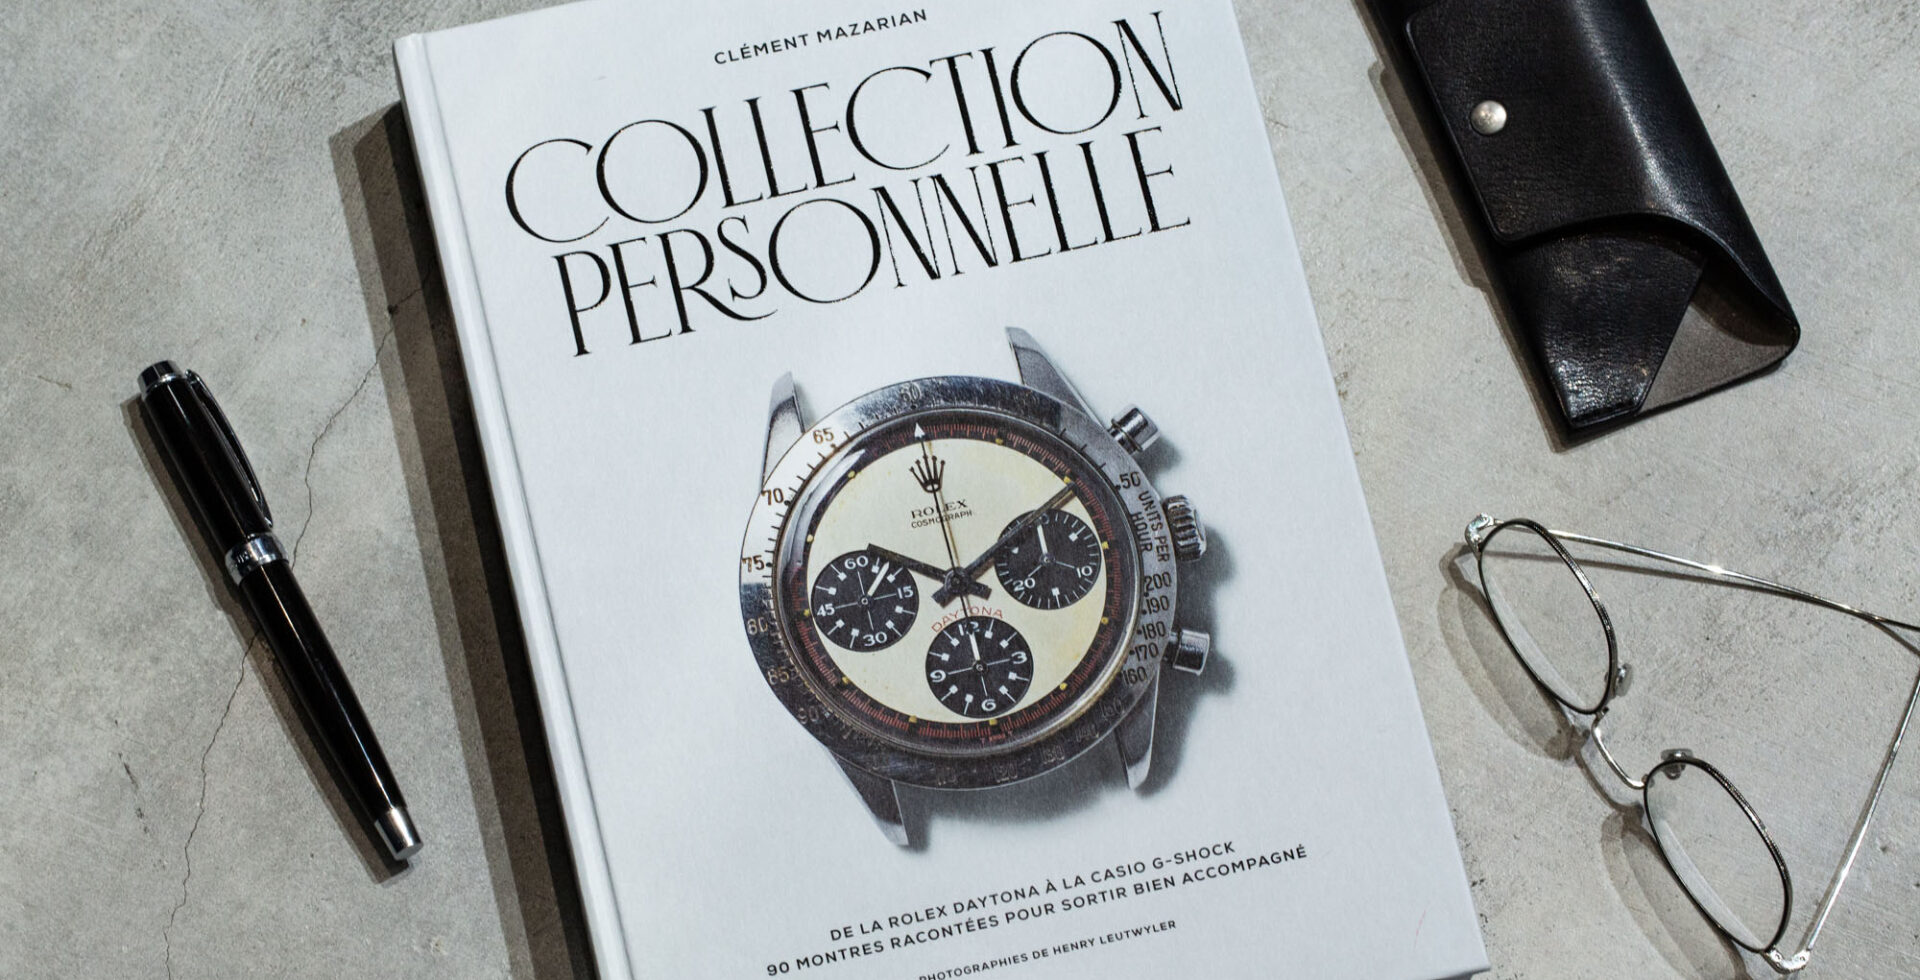 COLLECTION PERSONNELLE